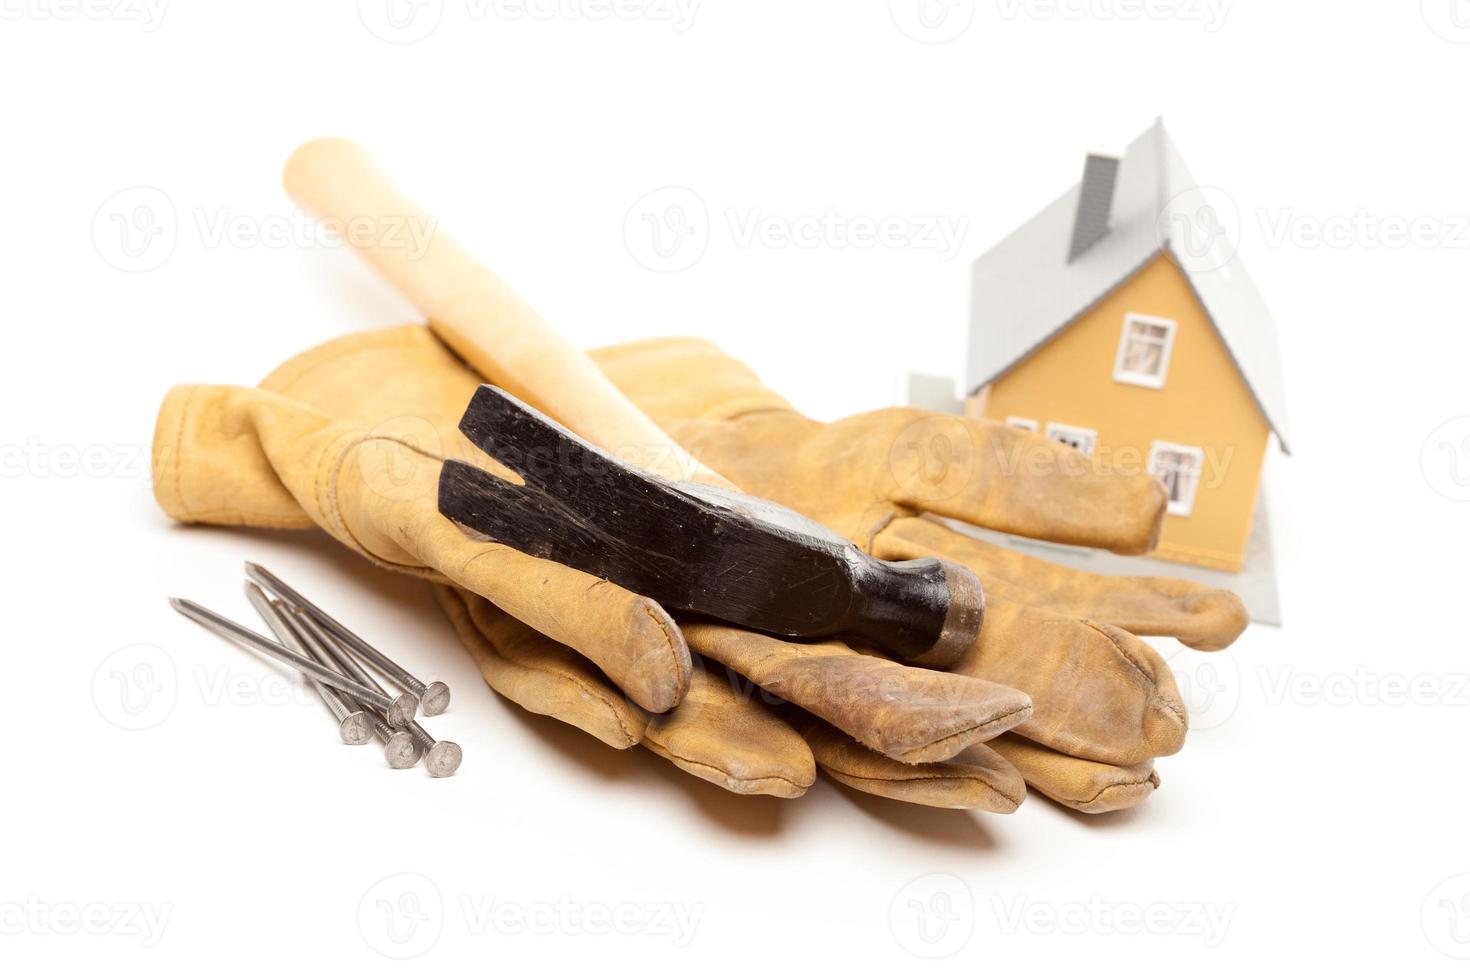 Hammer, Gloves, Nails and House photo